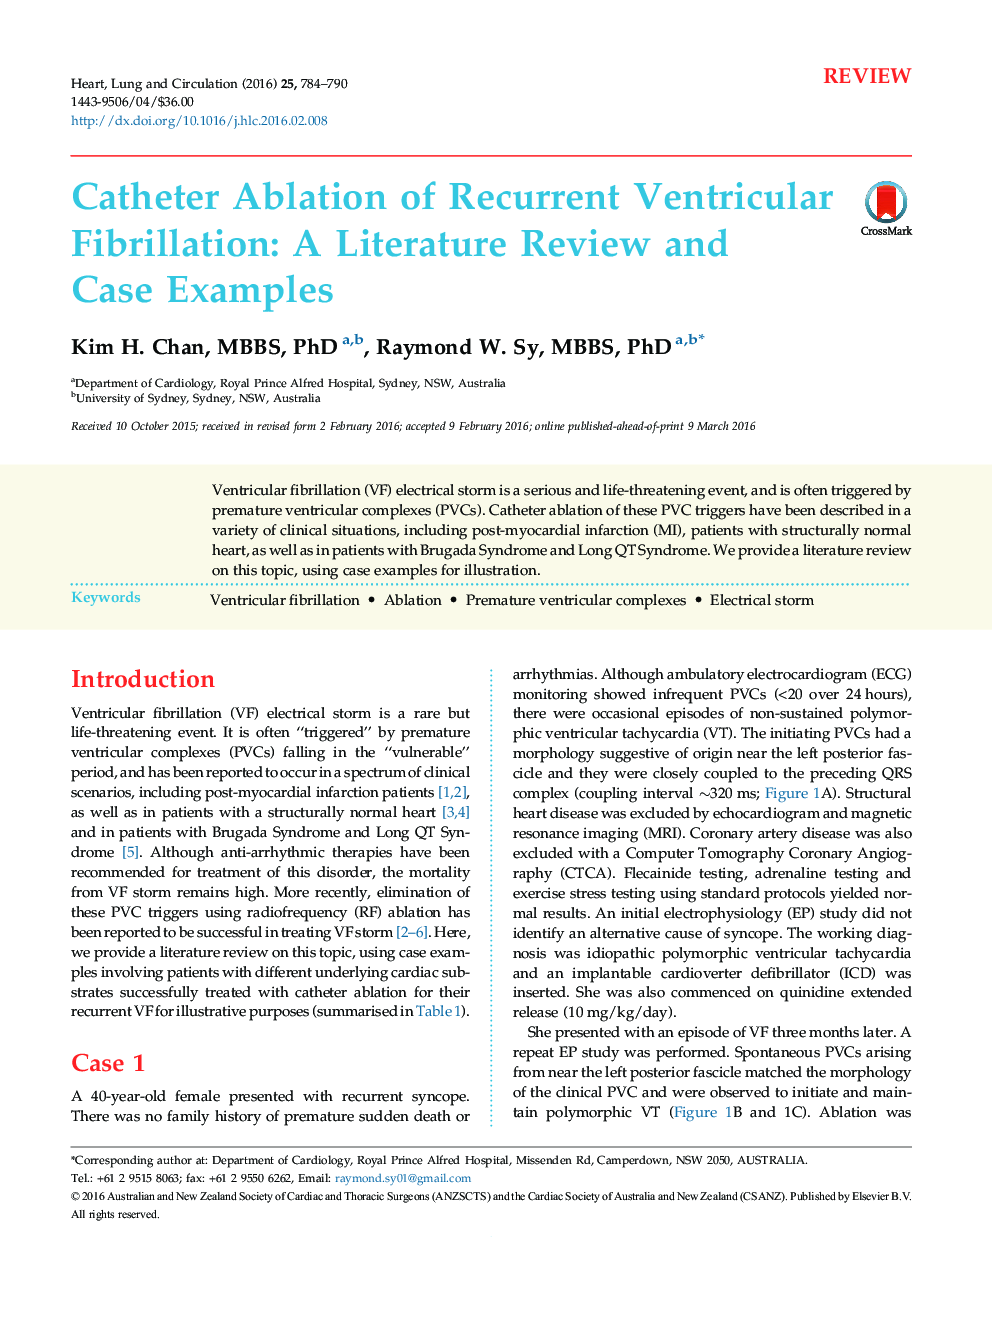 Catheter Ablation of Recurrent Ventricular Fibrillation: A Literature Review and Case Examples